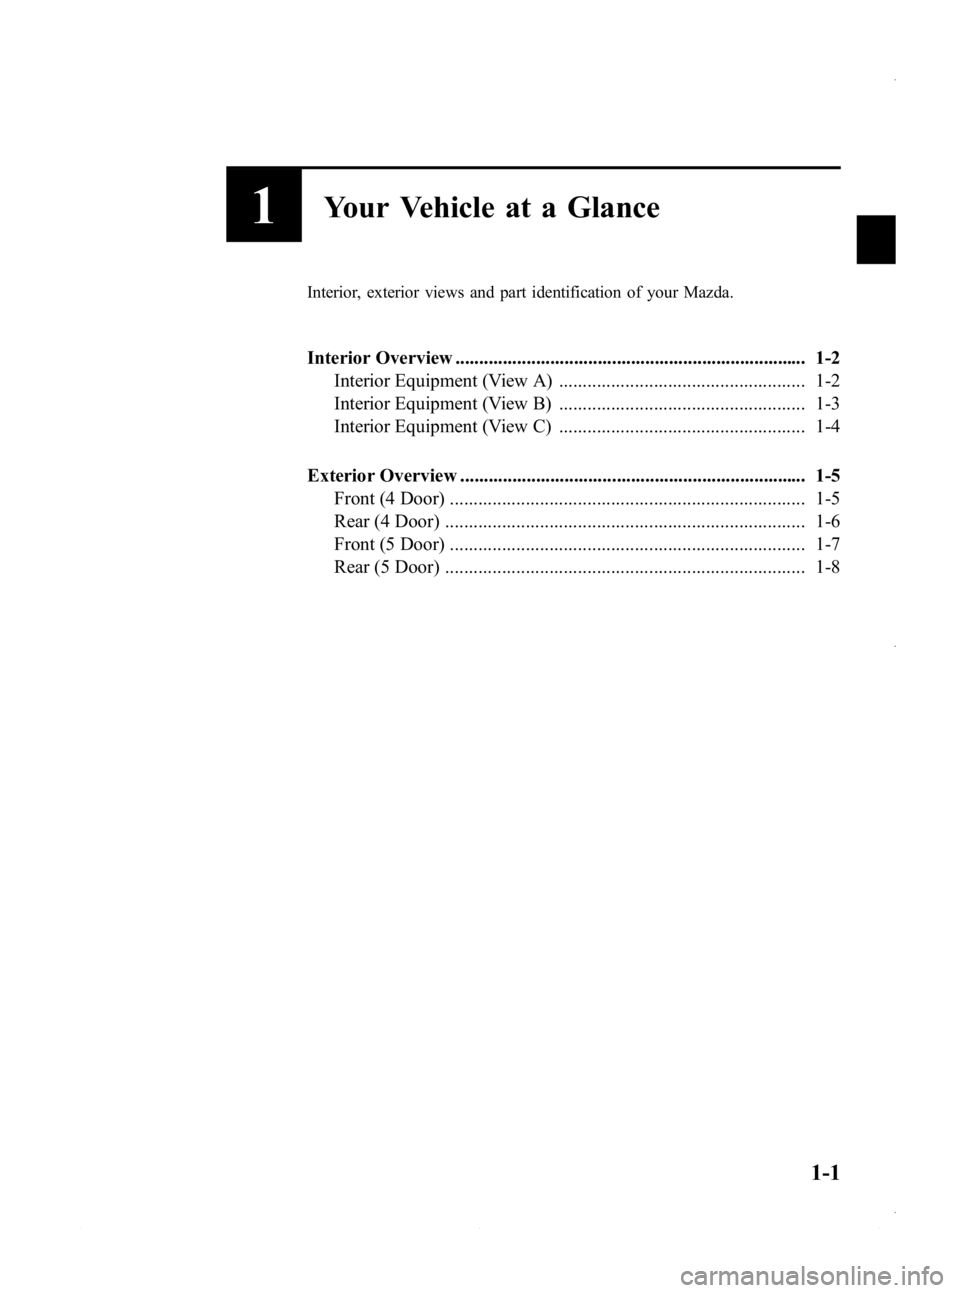 MAZDA MODEL 3 5-DOOR 2013  Owners Manual Black plate (7,1)
1Your Vehicle at a Glance
Interior, exterior views and part identification of your Mazda.
Interior Overview ..........................................................................